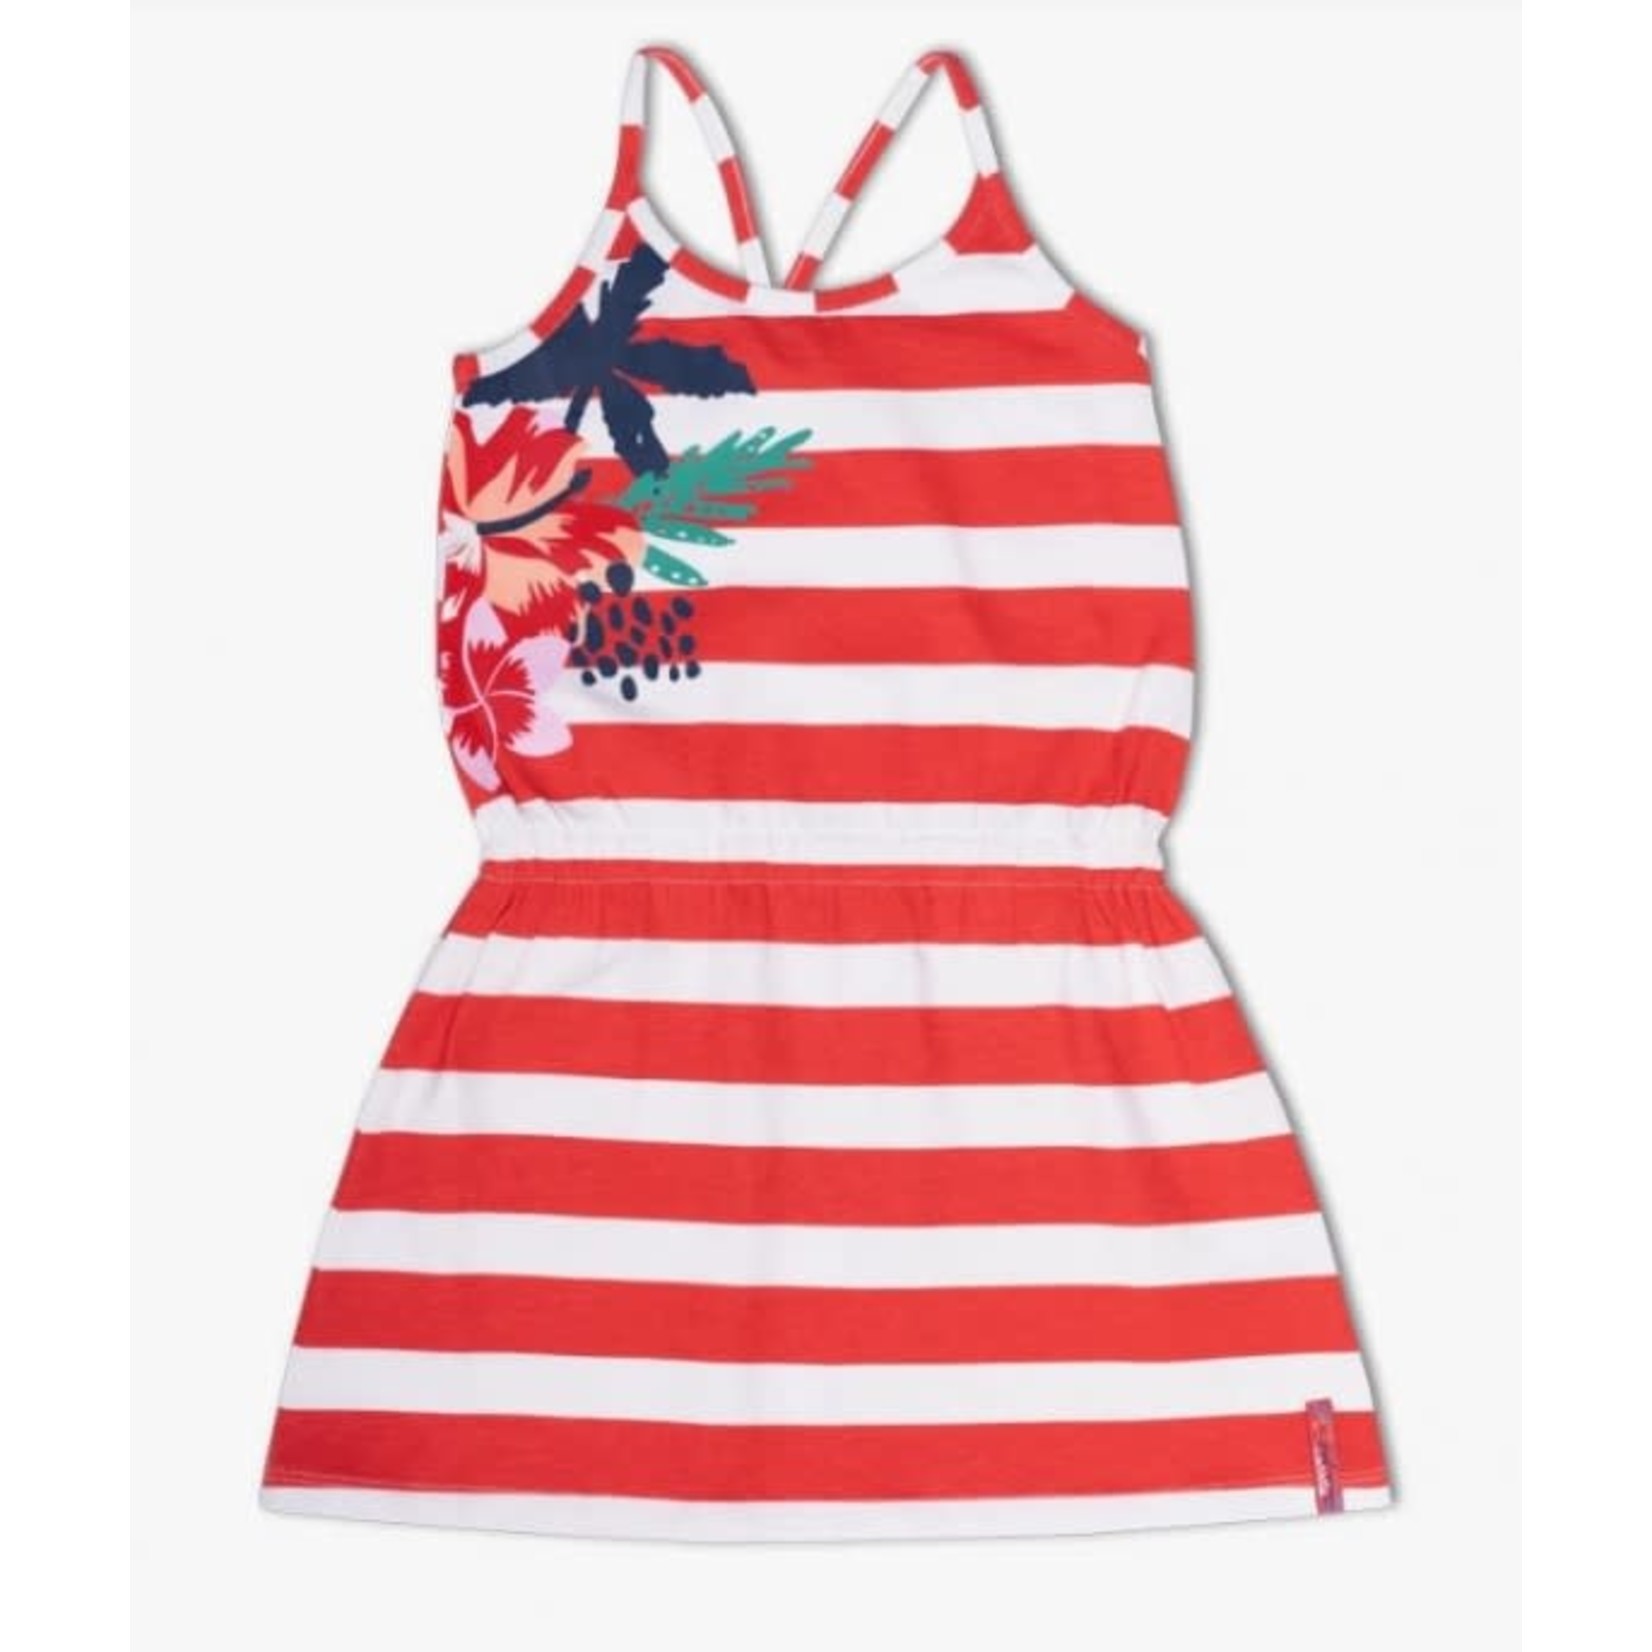 TucTuc TUC TUC- Striped jersey dress  'Hello Playa'